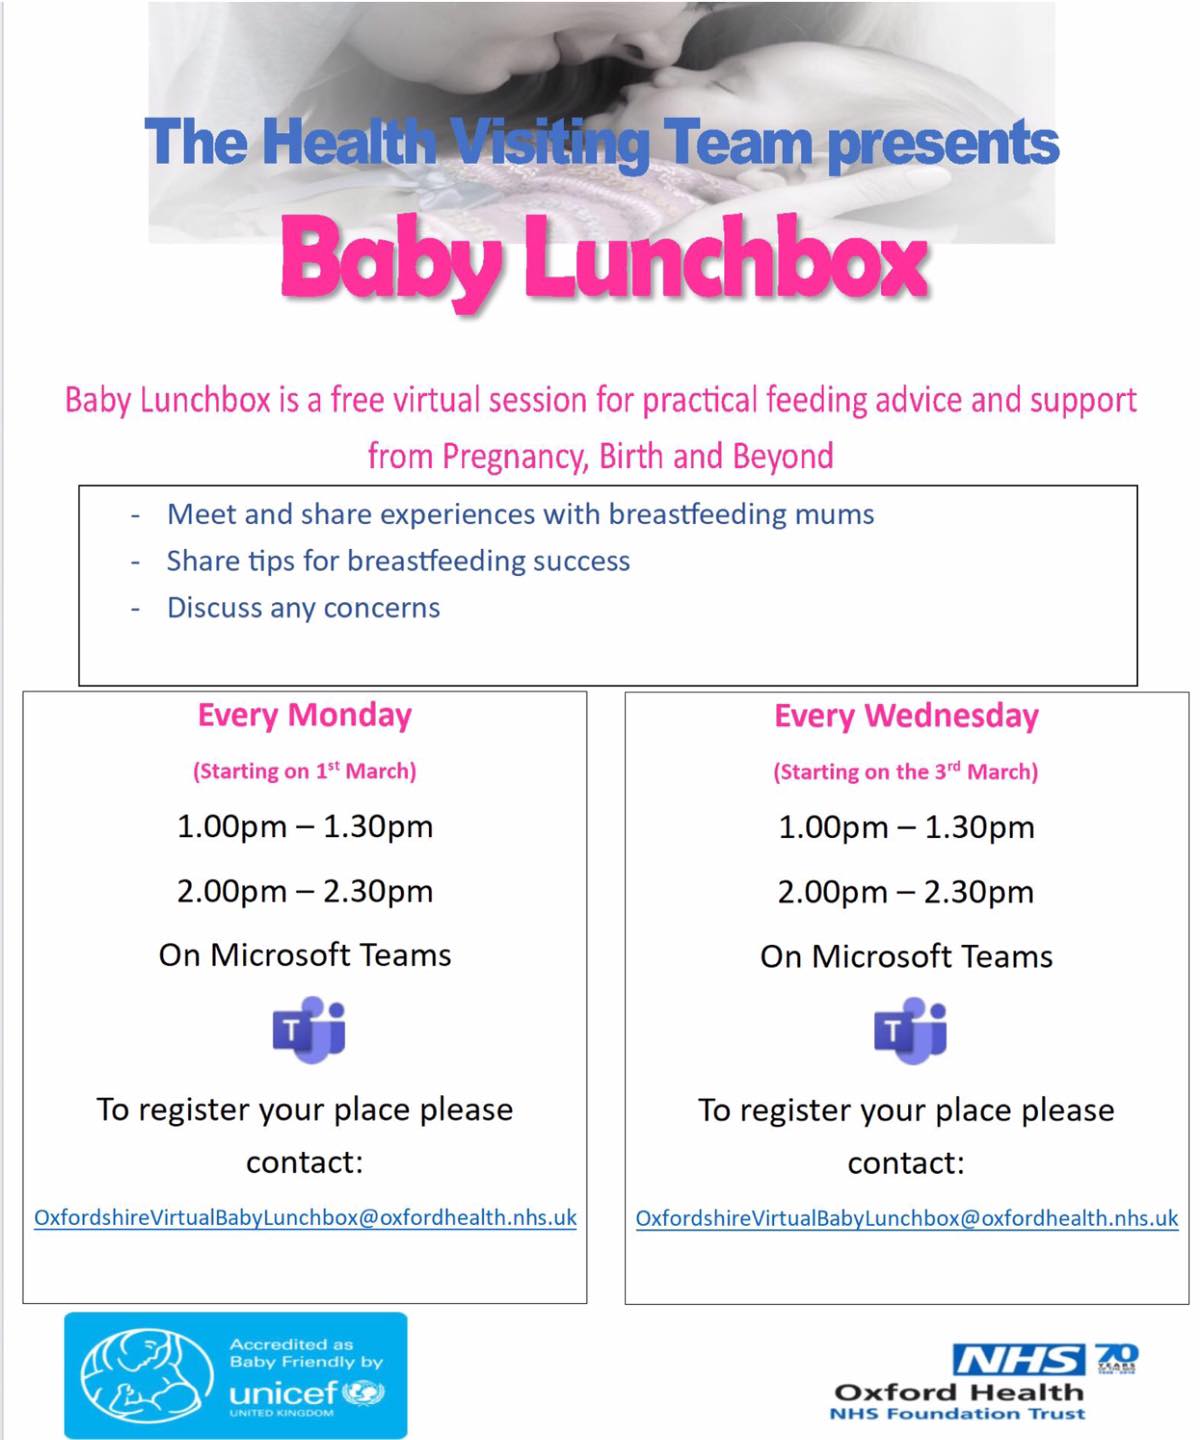 Oxfordshire Health Visting Team Baby Lunchbox Poster. Mondays & Wednesdays from 1-130 & 2-230. Book by emailing OxfordshireVirtualBabyLunchbox@oxfordhealth.nhs.uk